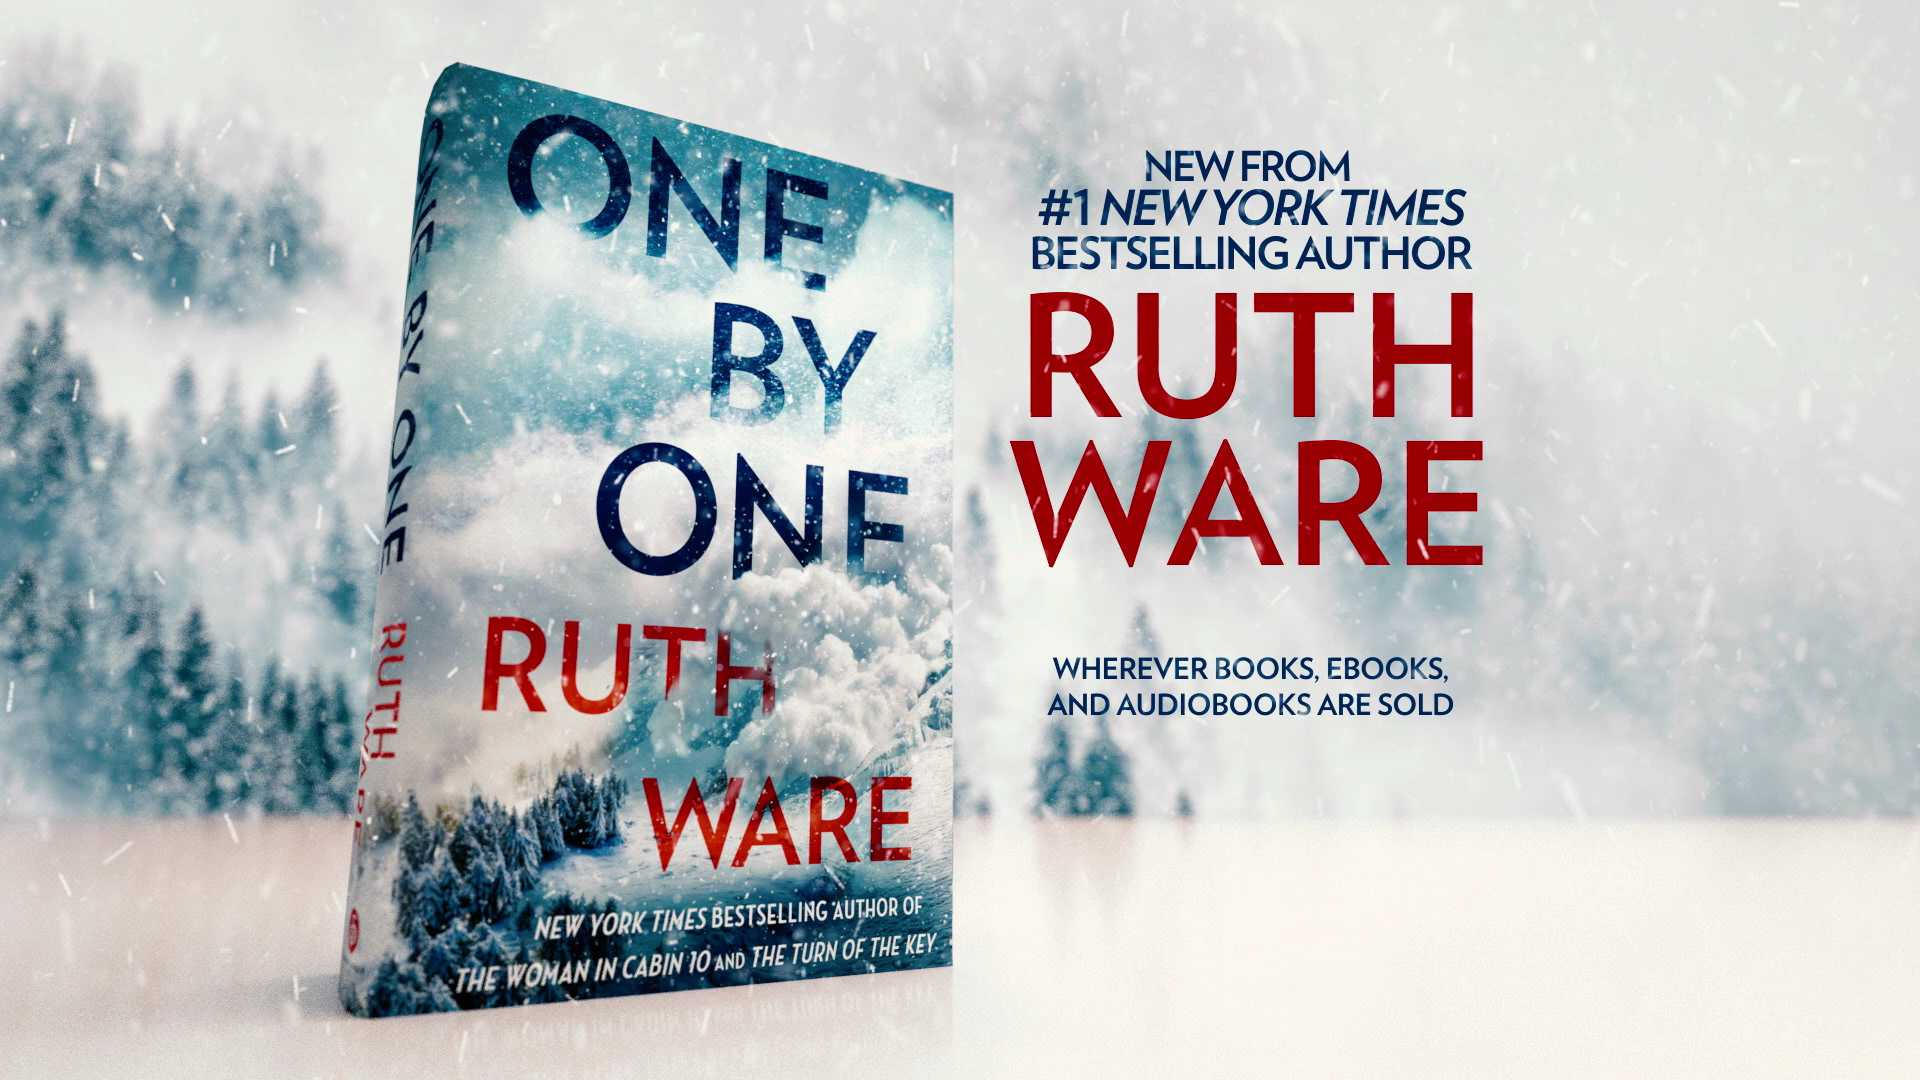 ruth ware one by one summary